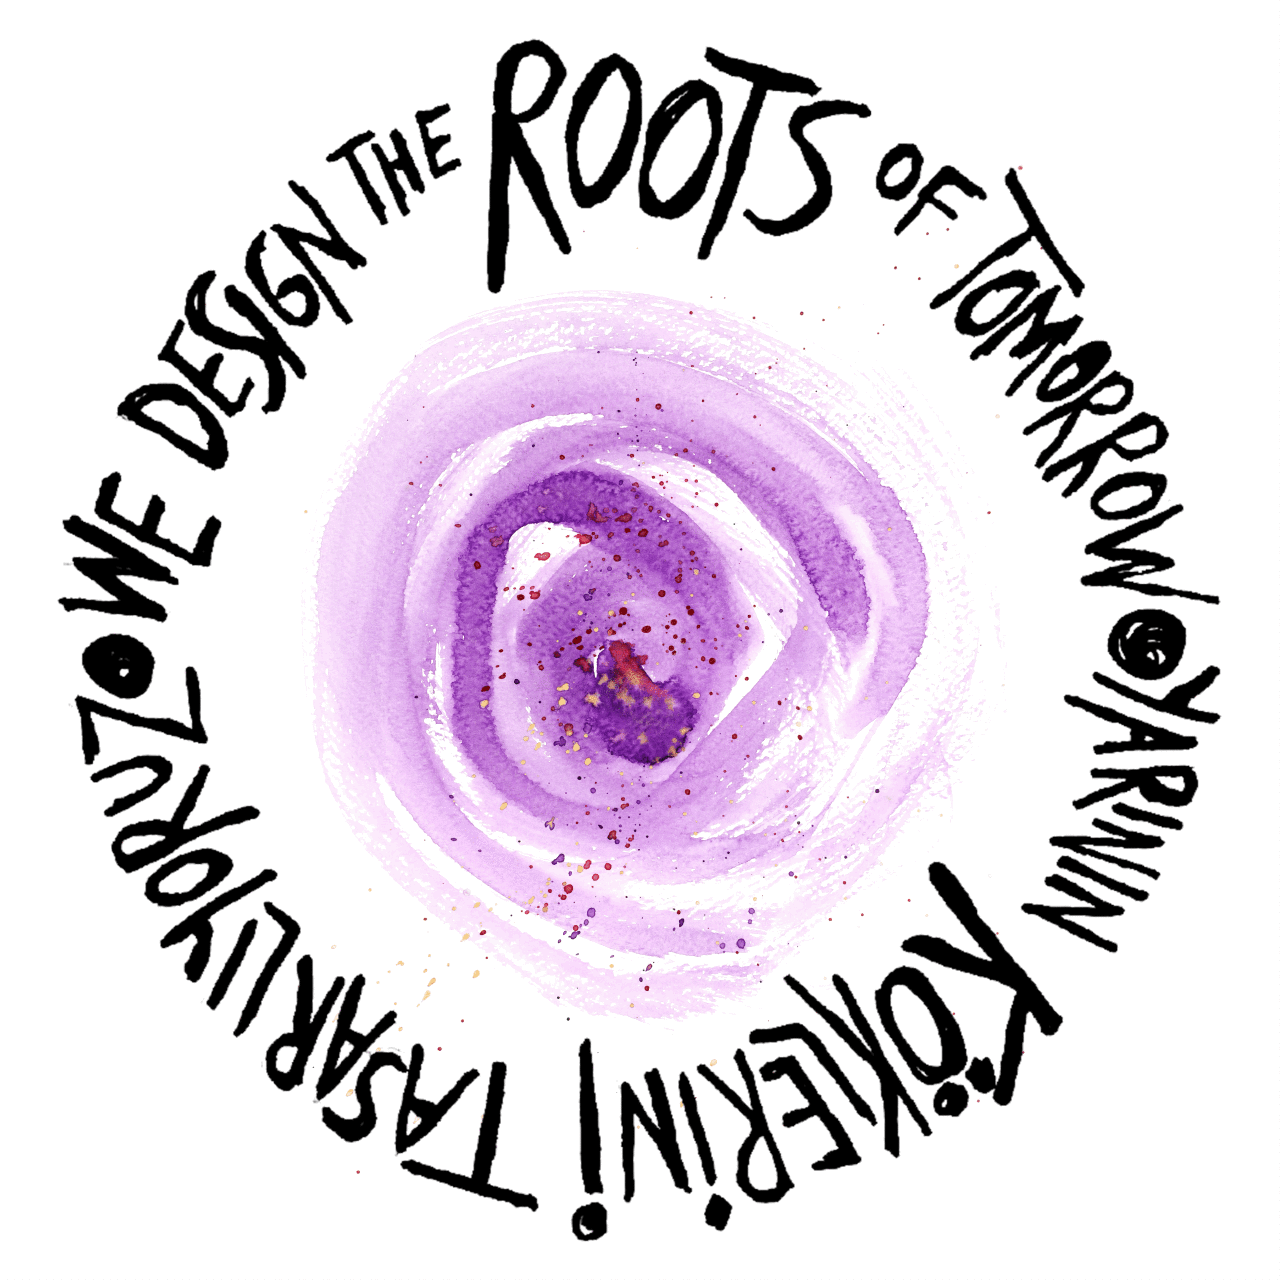 We Design The Roots Of Tomorrow